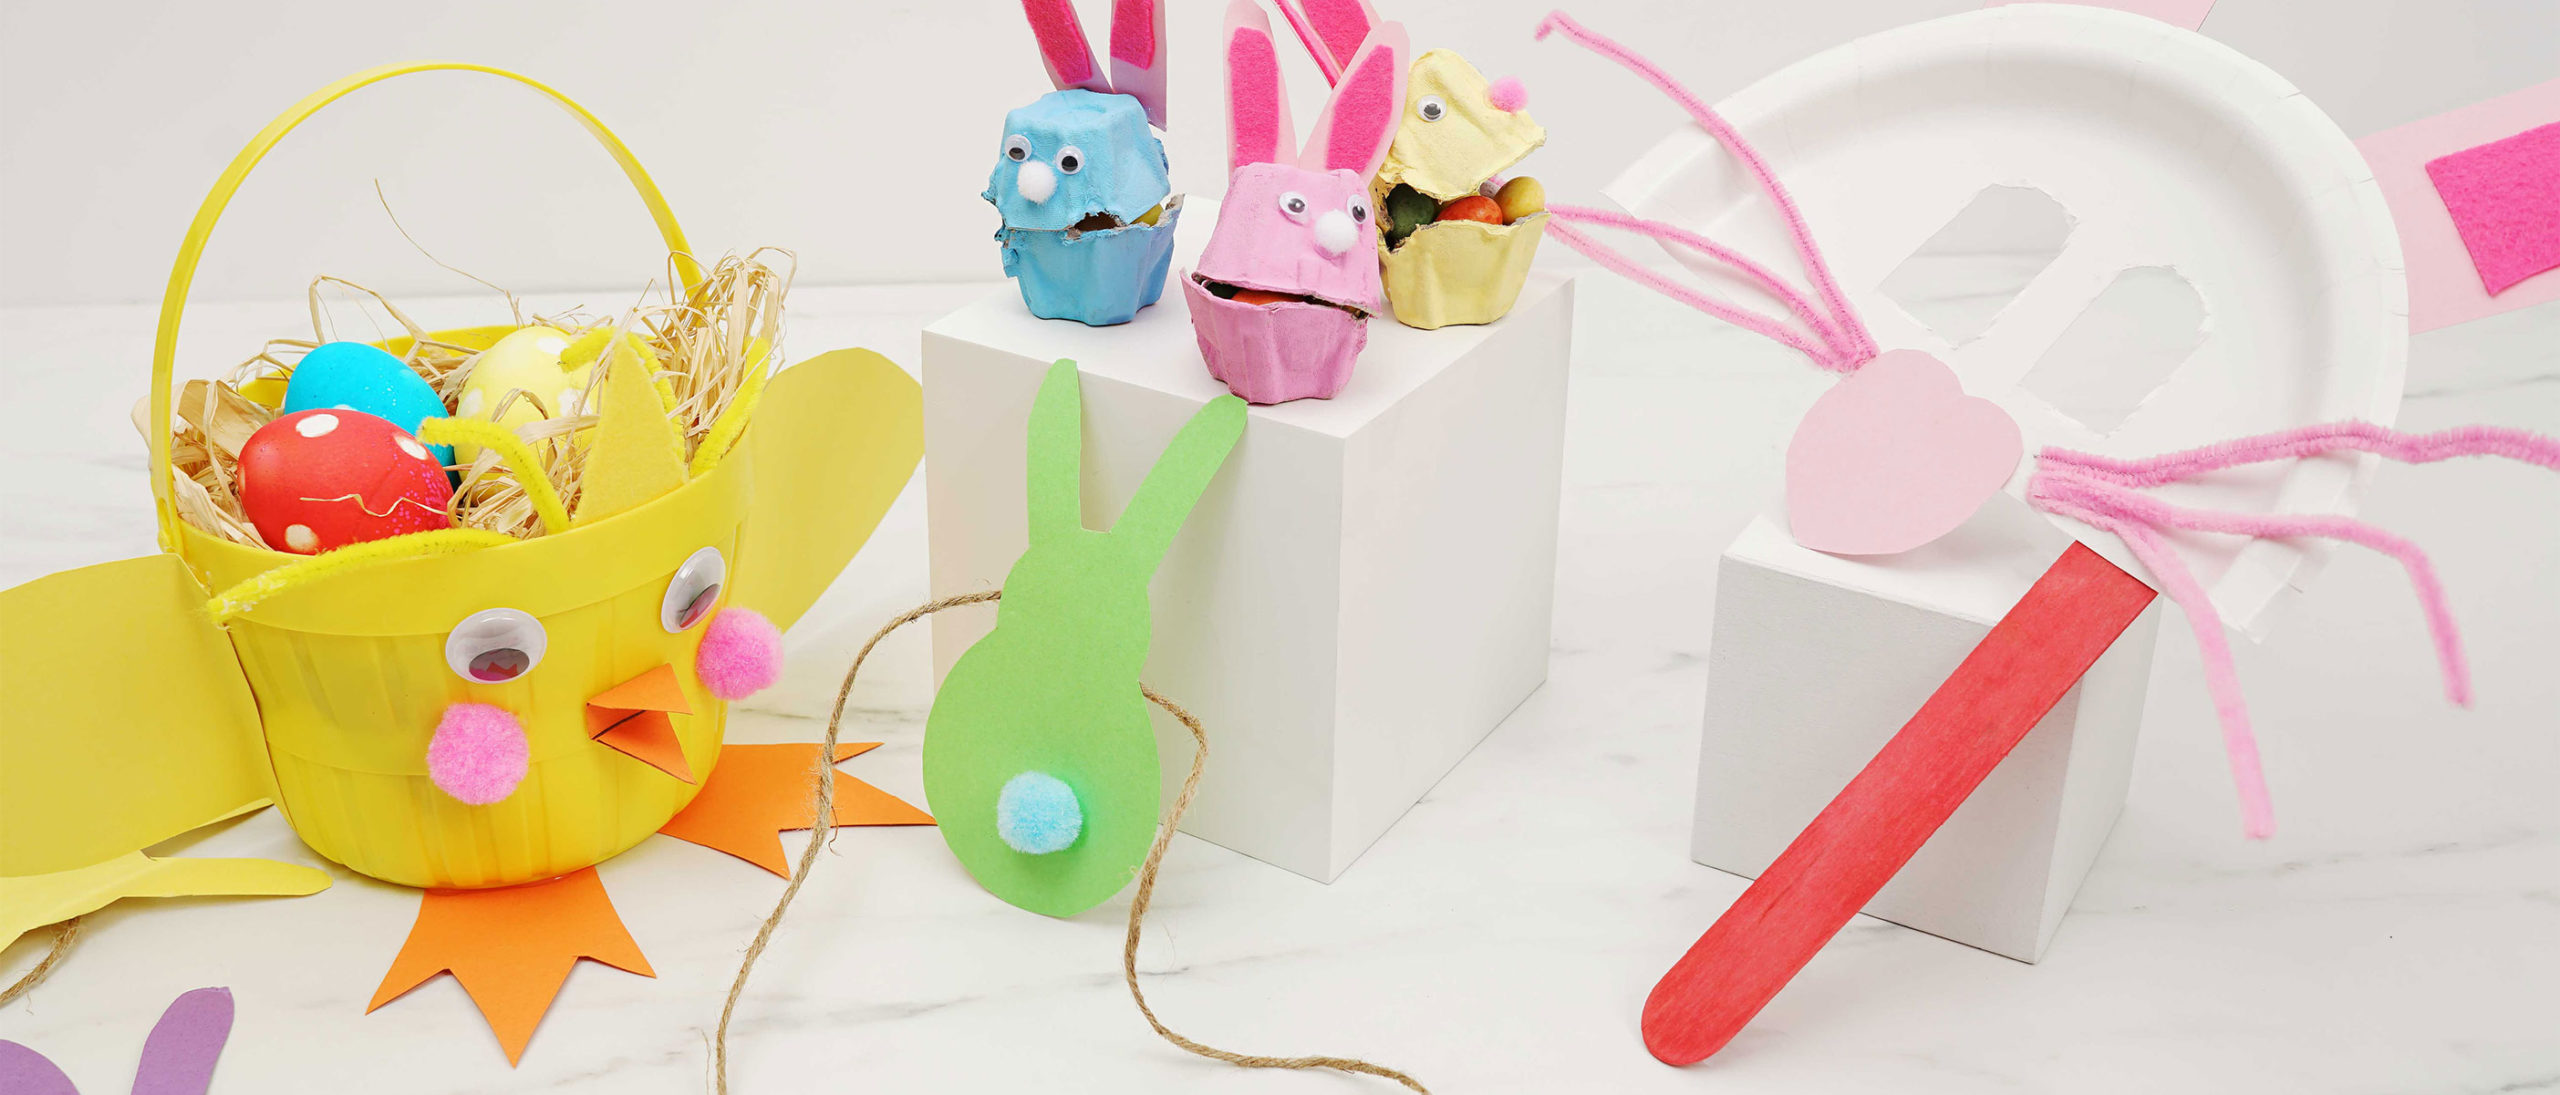 5 Simple Easter DIY Crafts in Under 30 Minutes